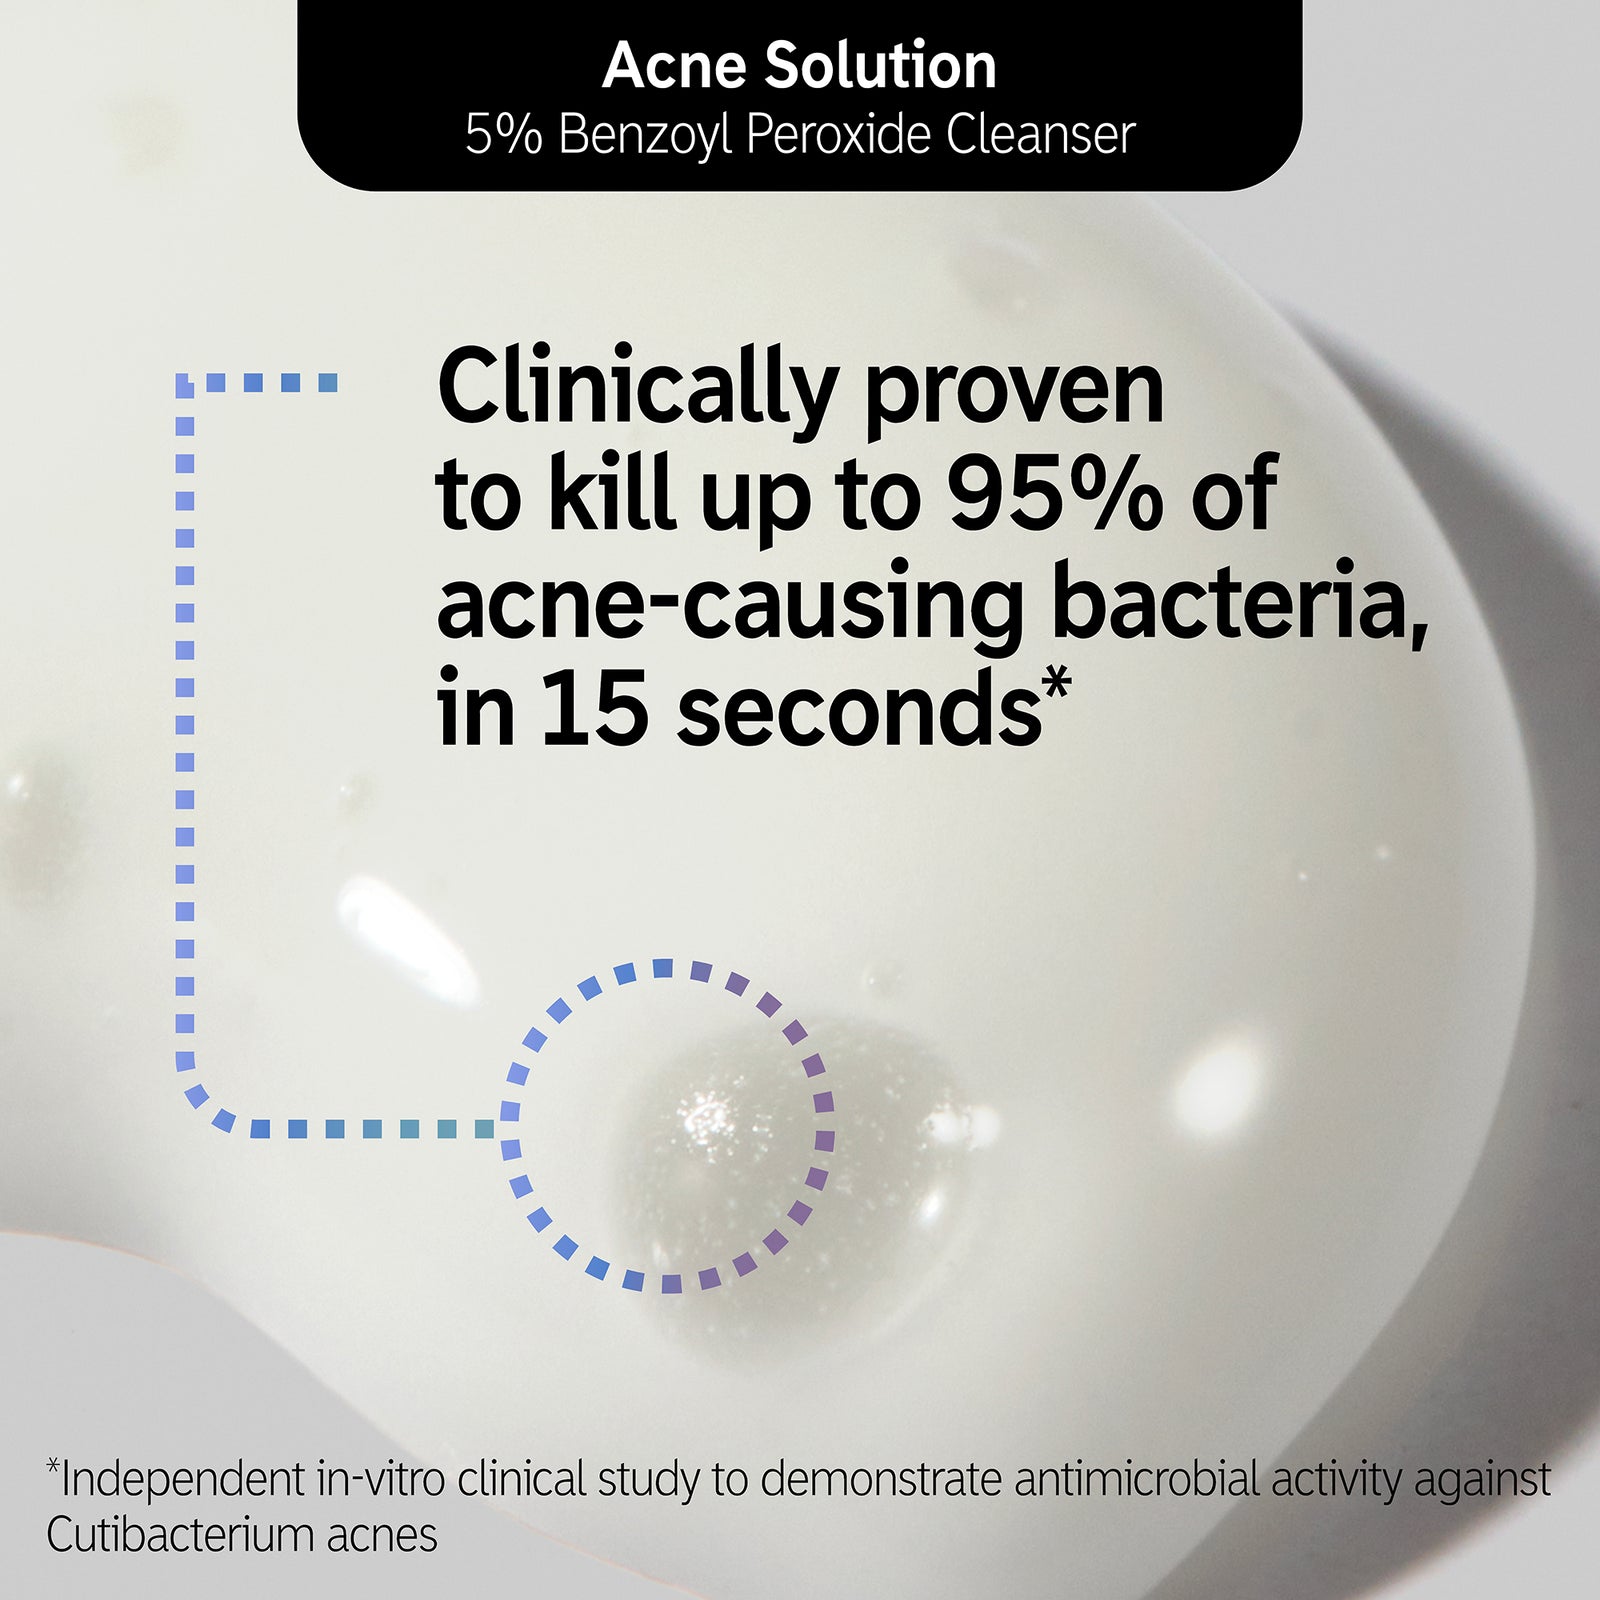 Acne Solution goop shot annotated with a statistic about killing bacteria